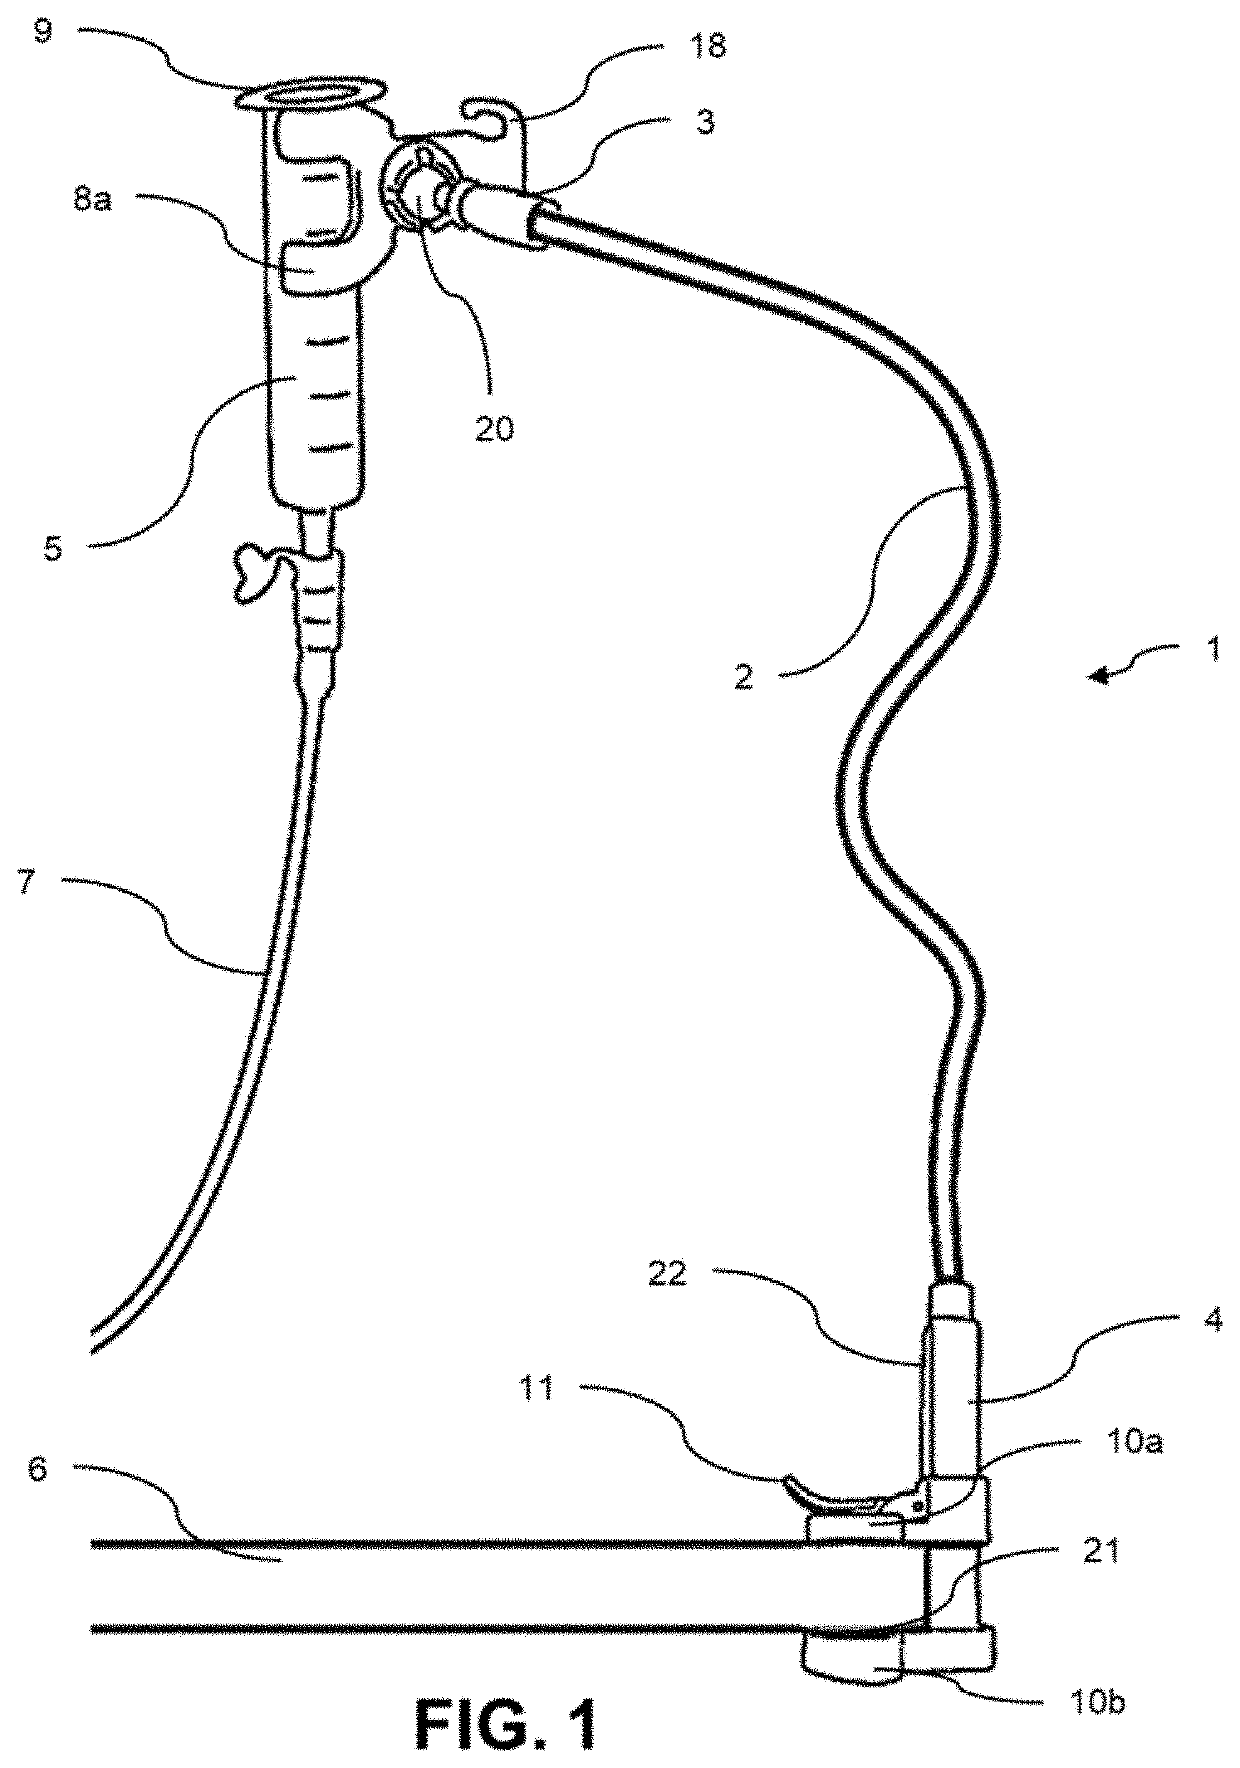 Device and Method Useful in Mobile Administering of Feed Products to Patients